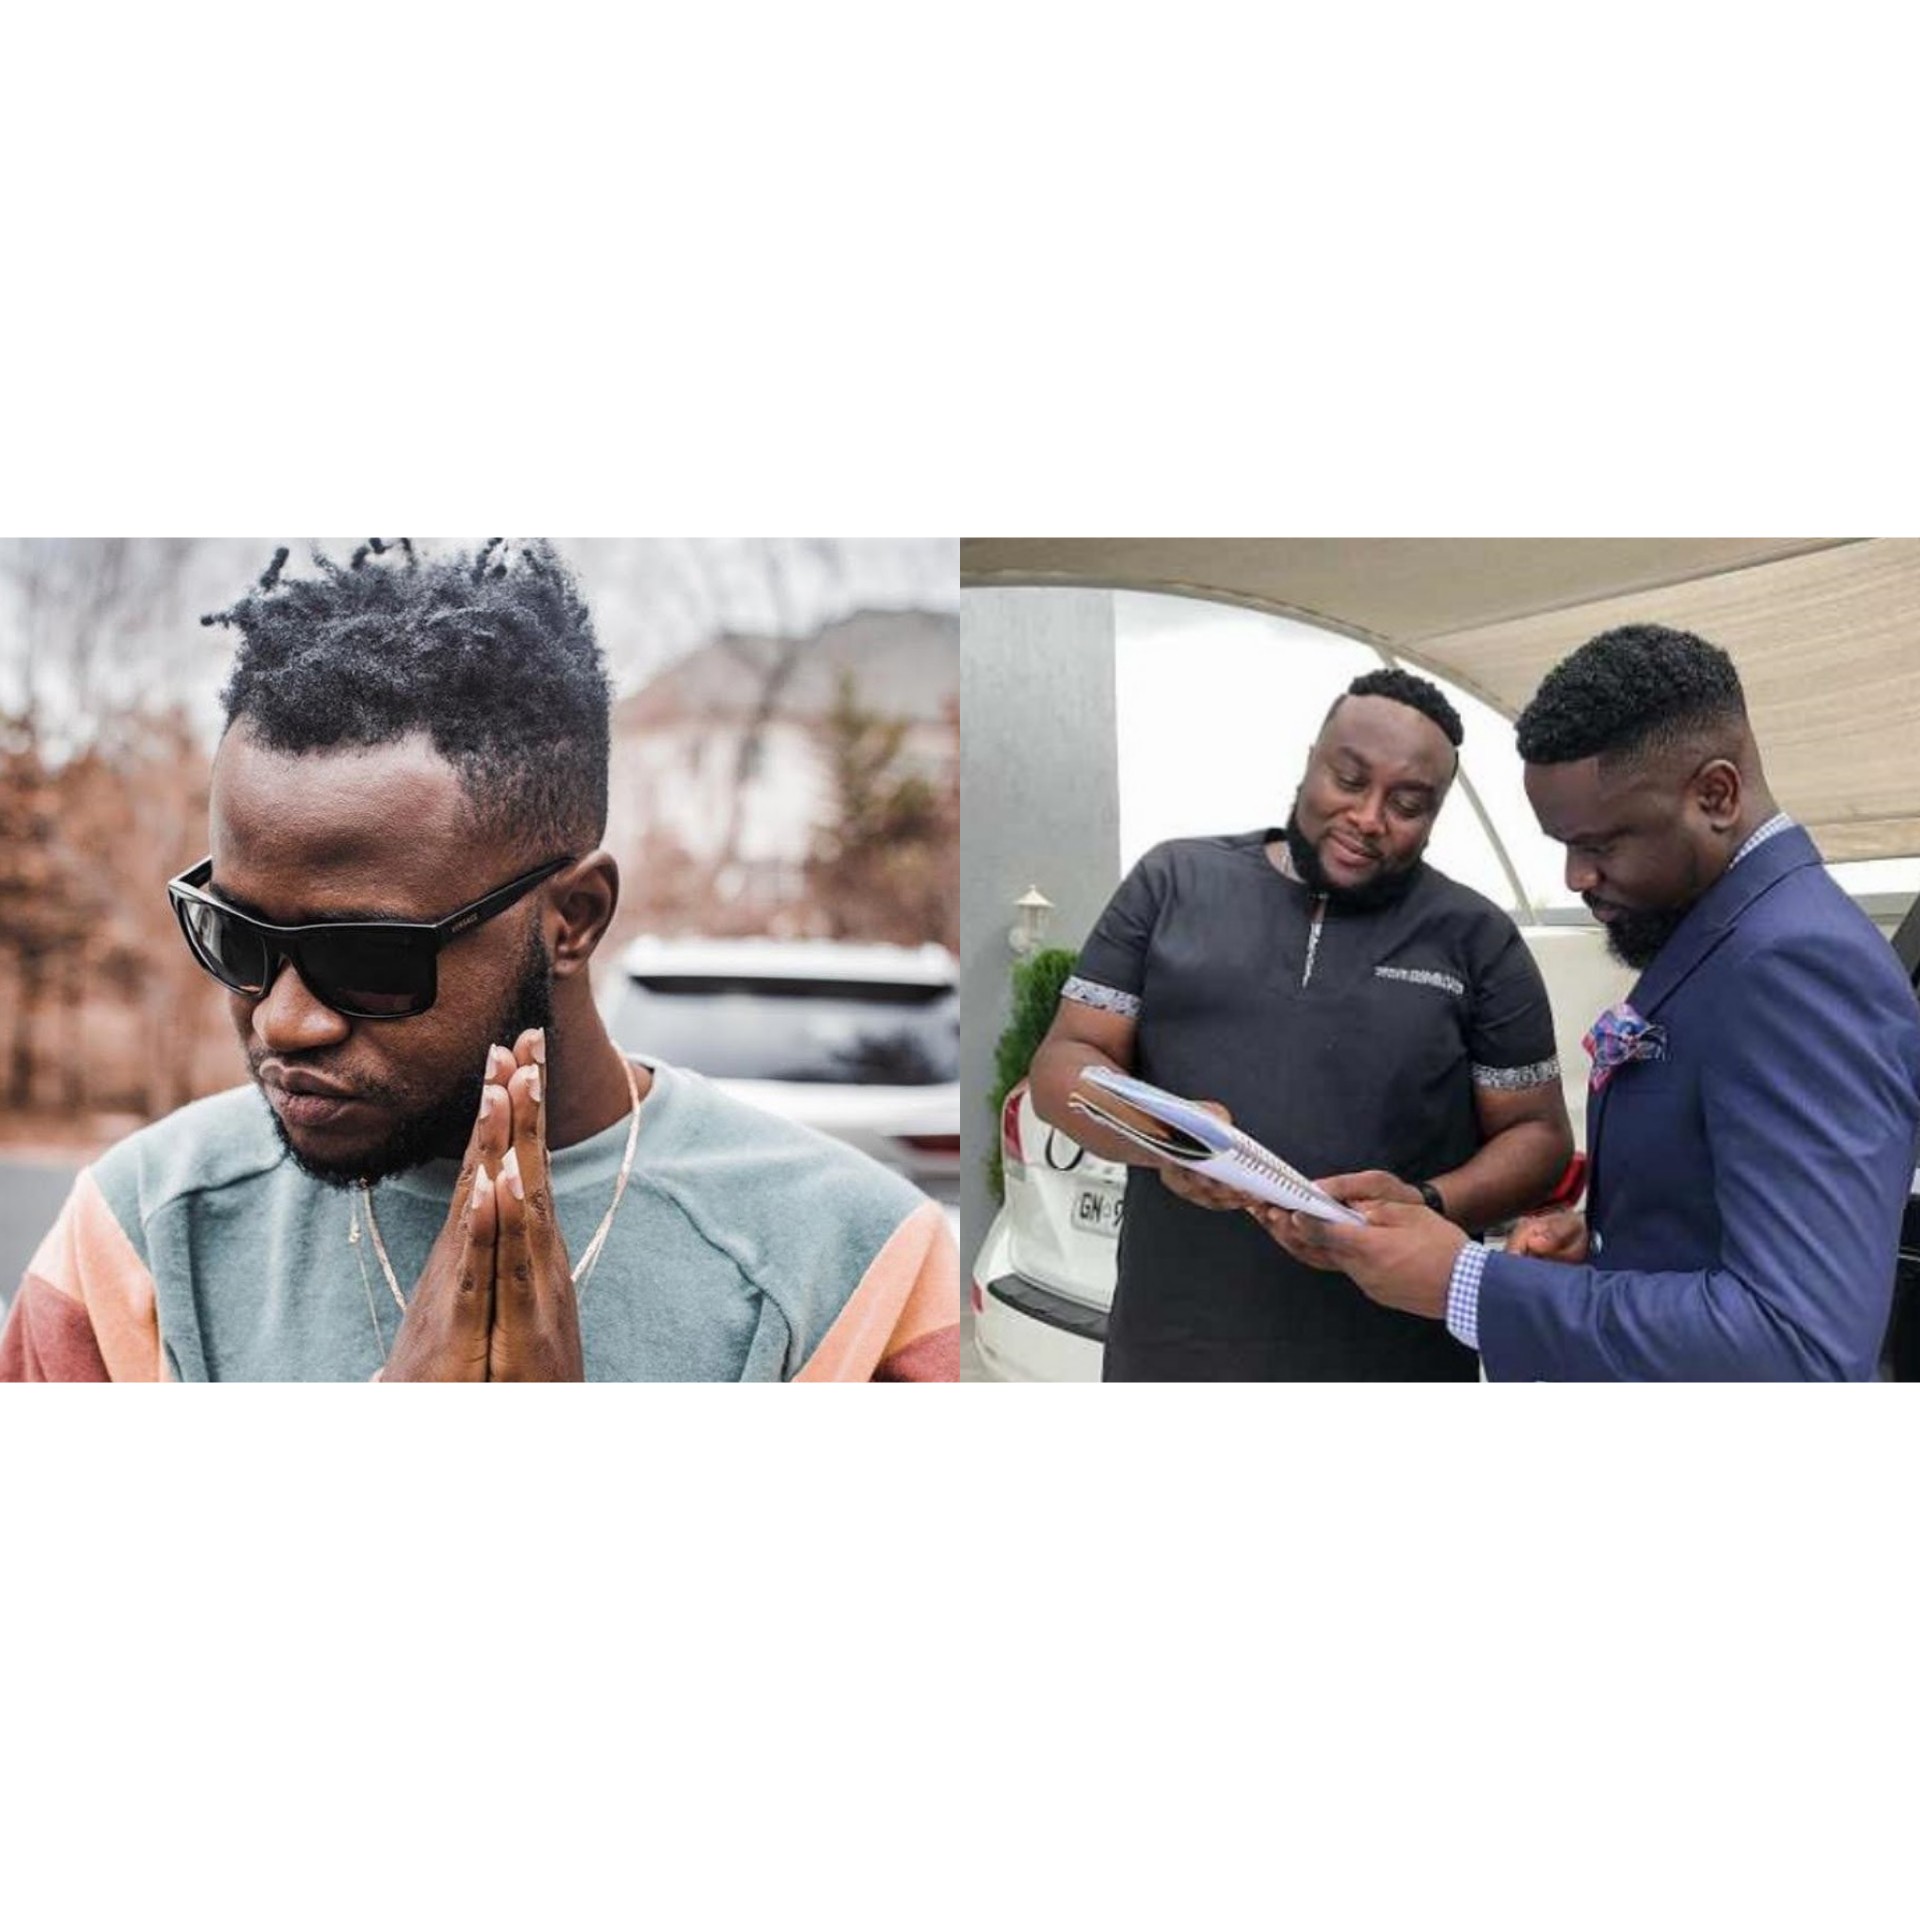 I Asked Nautyca To Take Sarkodie’s Verse Off His Song – Angel Town Speaks